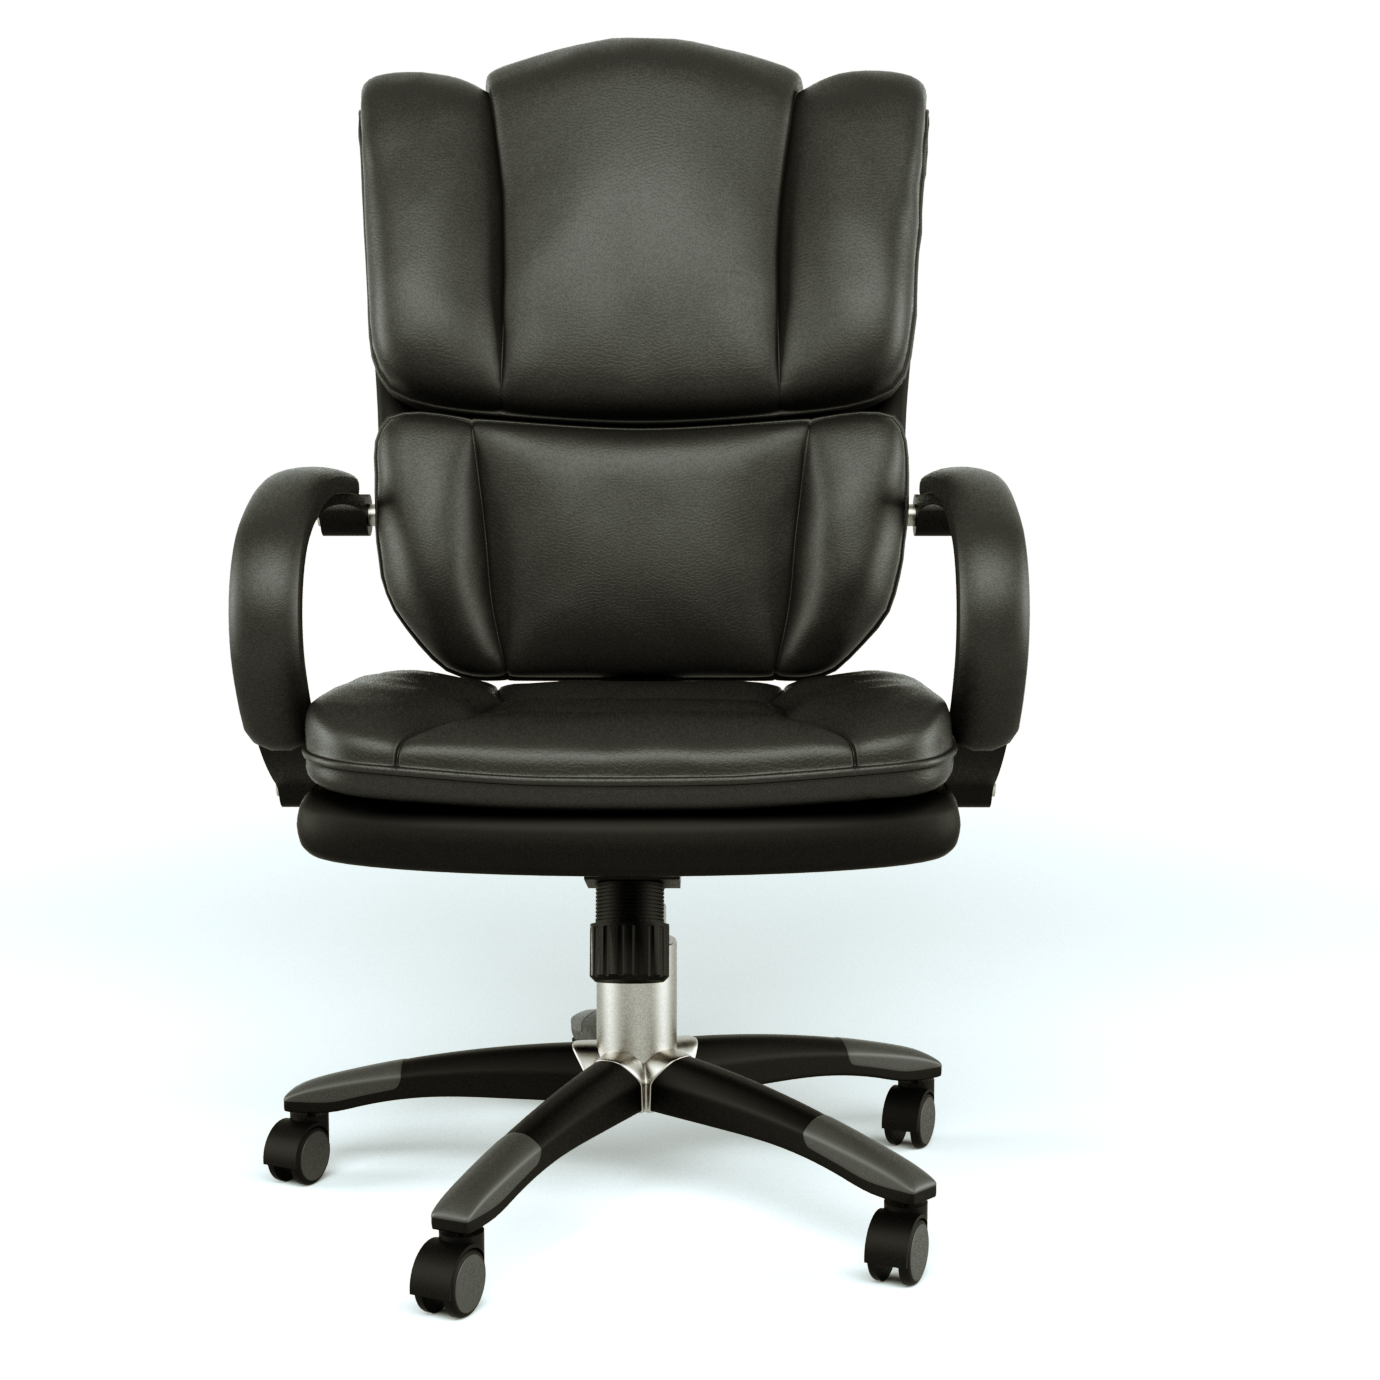 Office chair 2.png